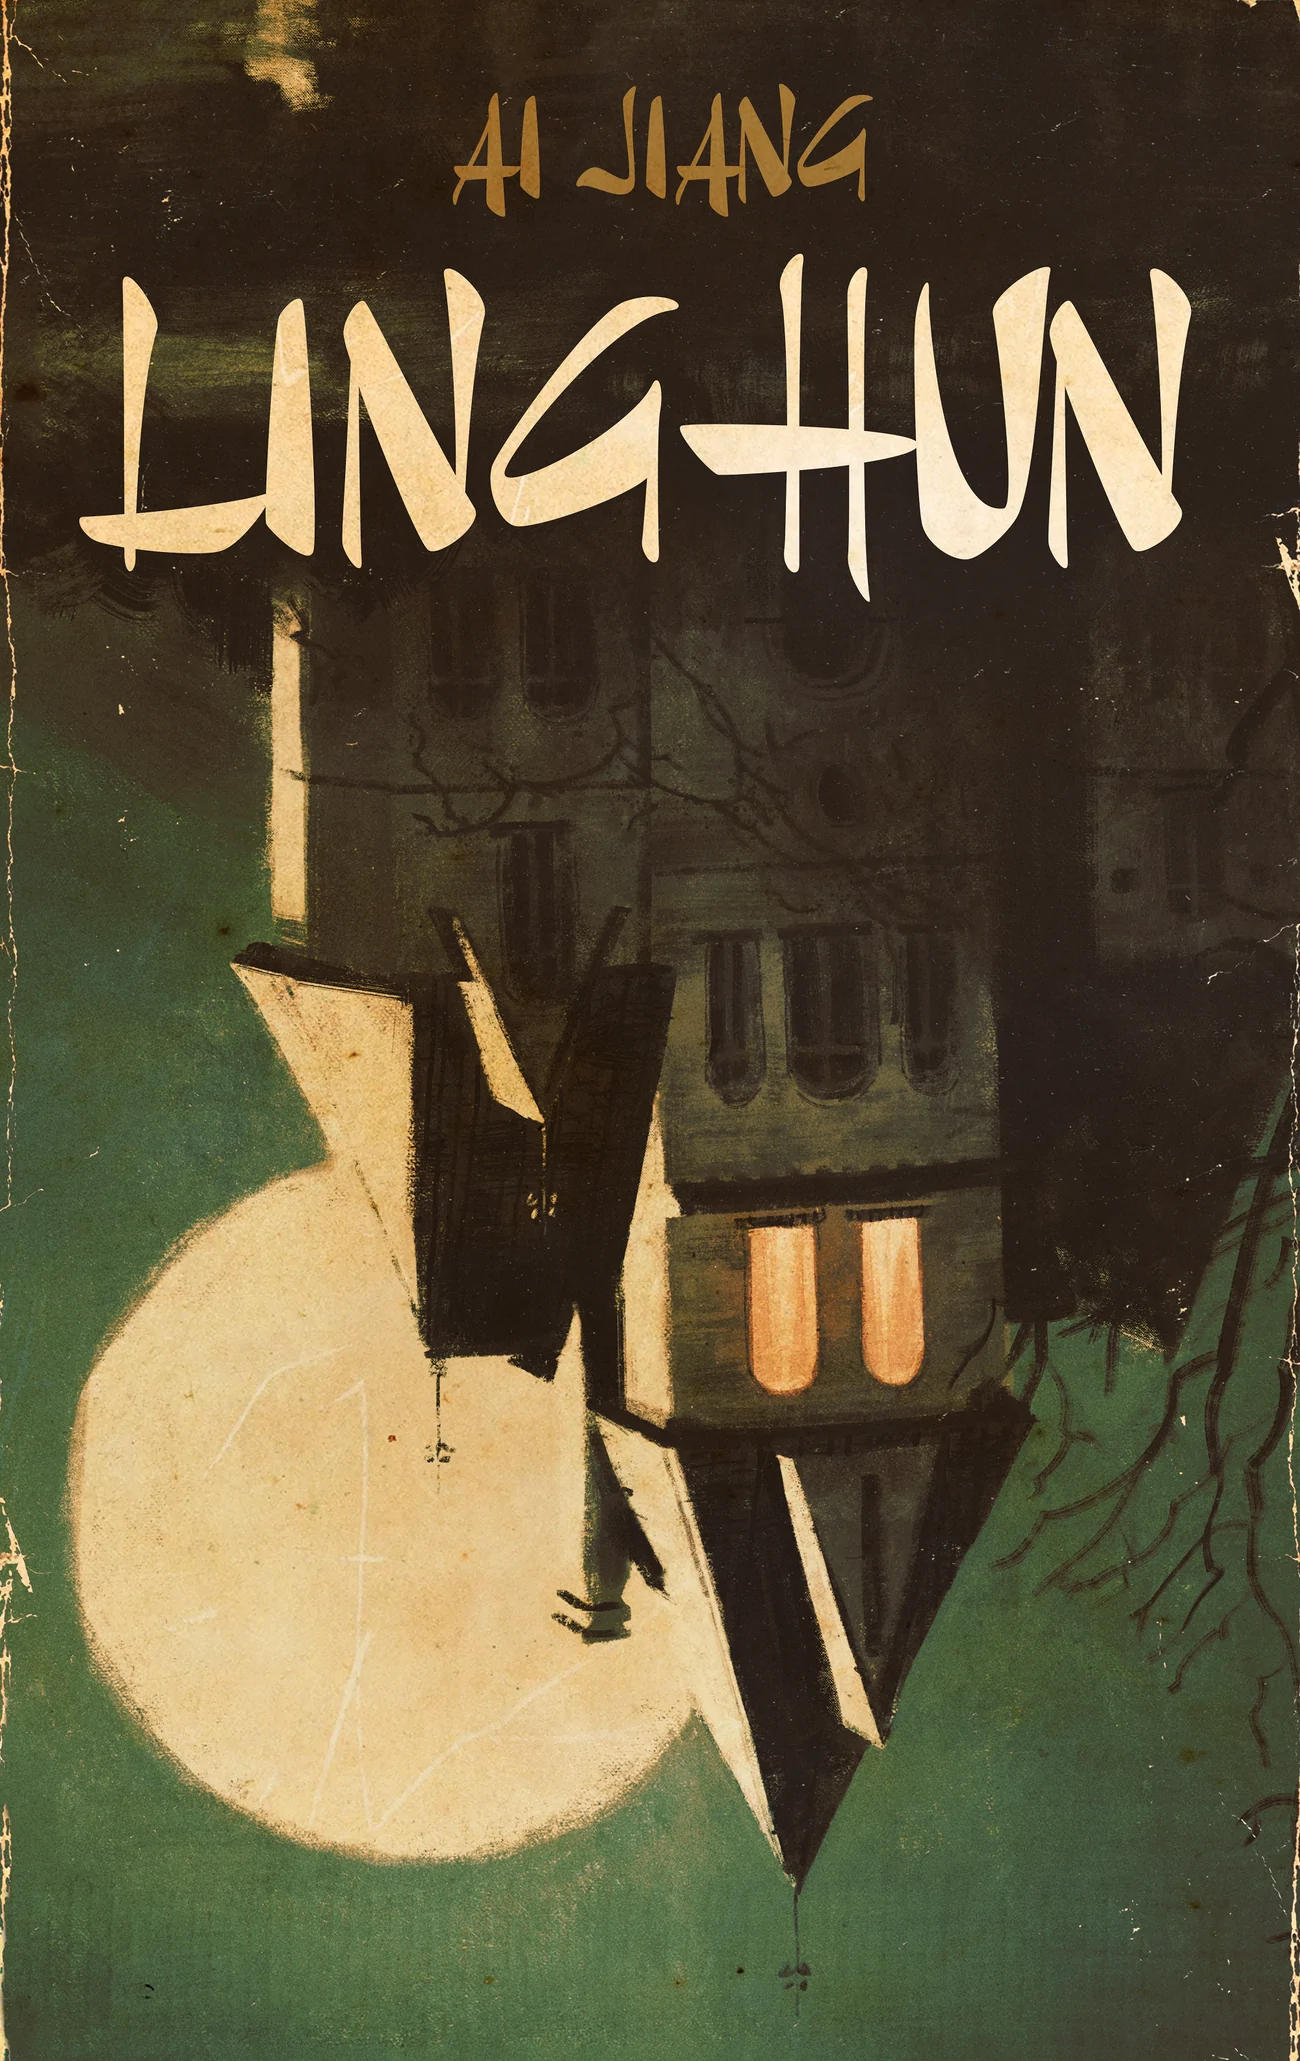 
					Cover art from "Linghun" by Ai Jiang